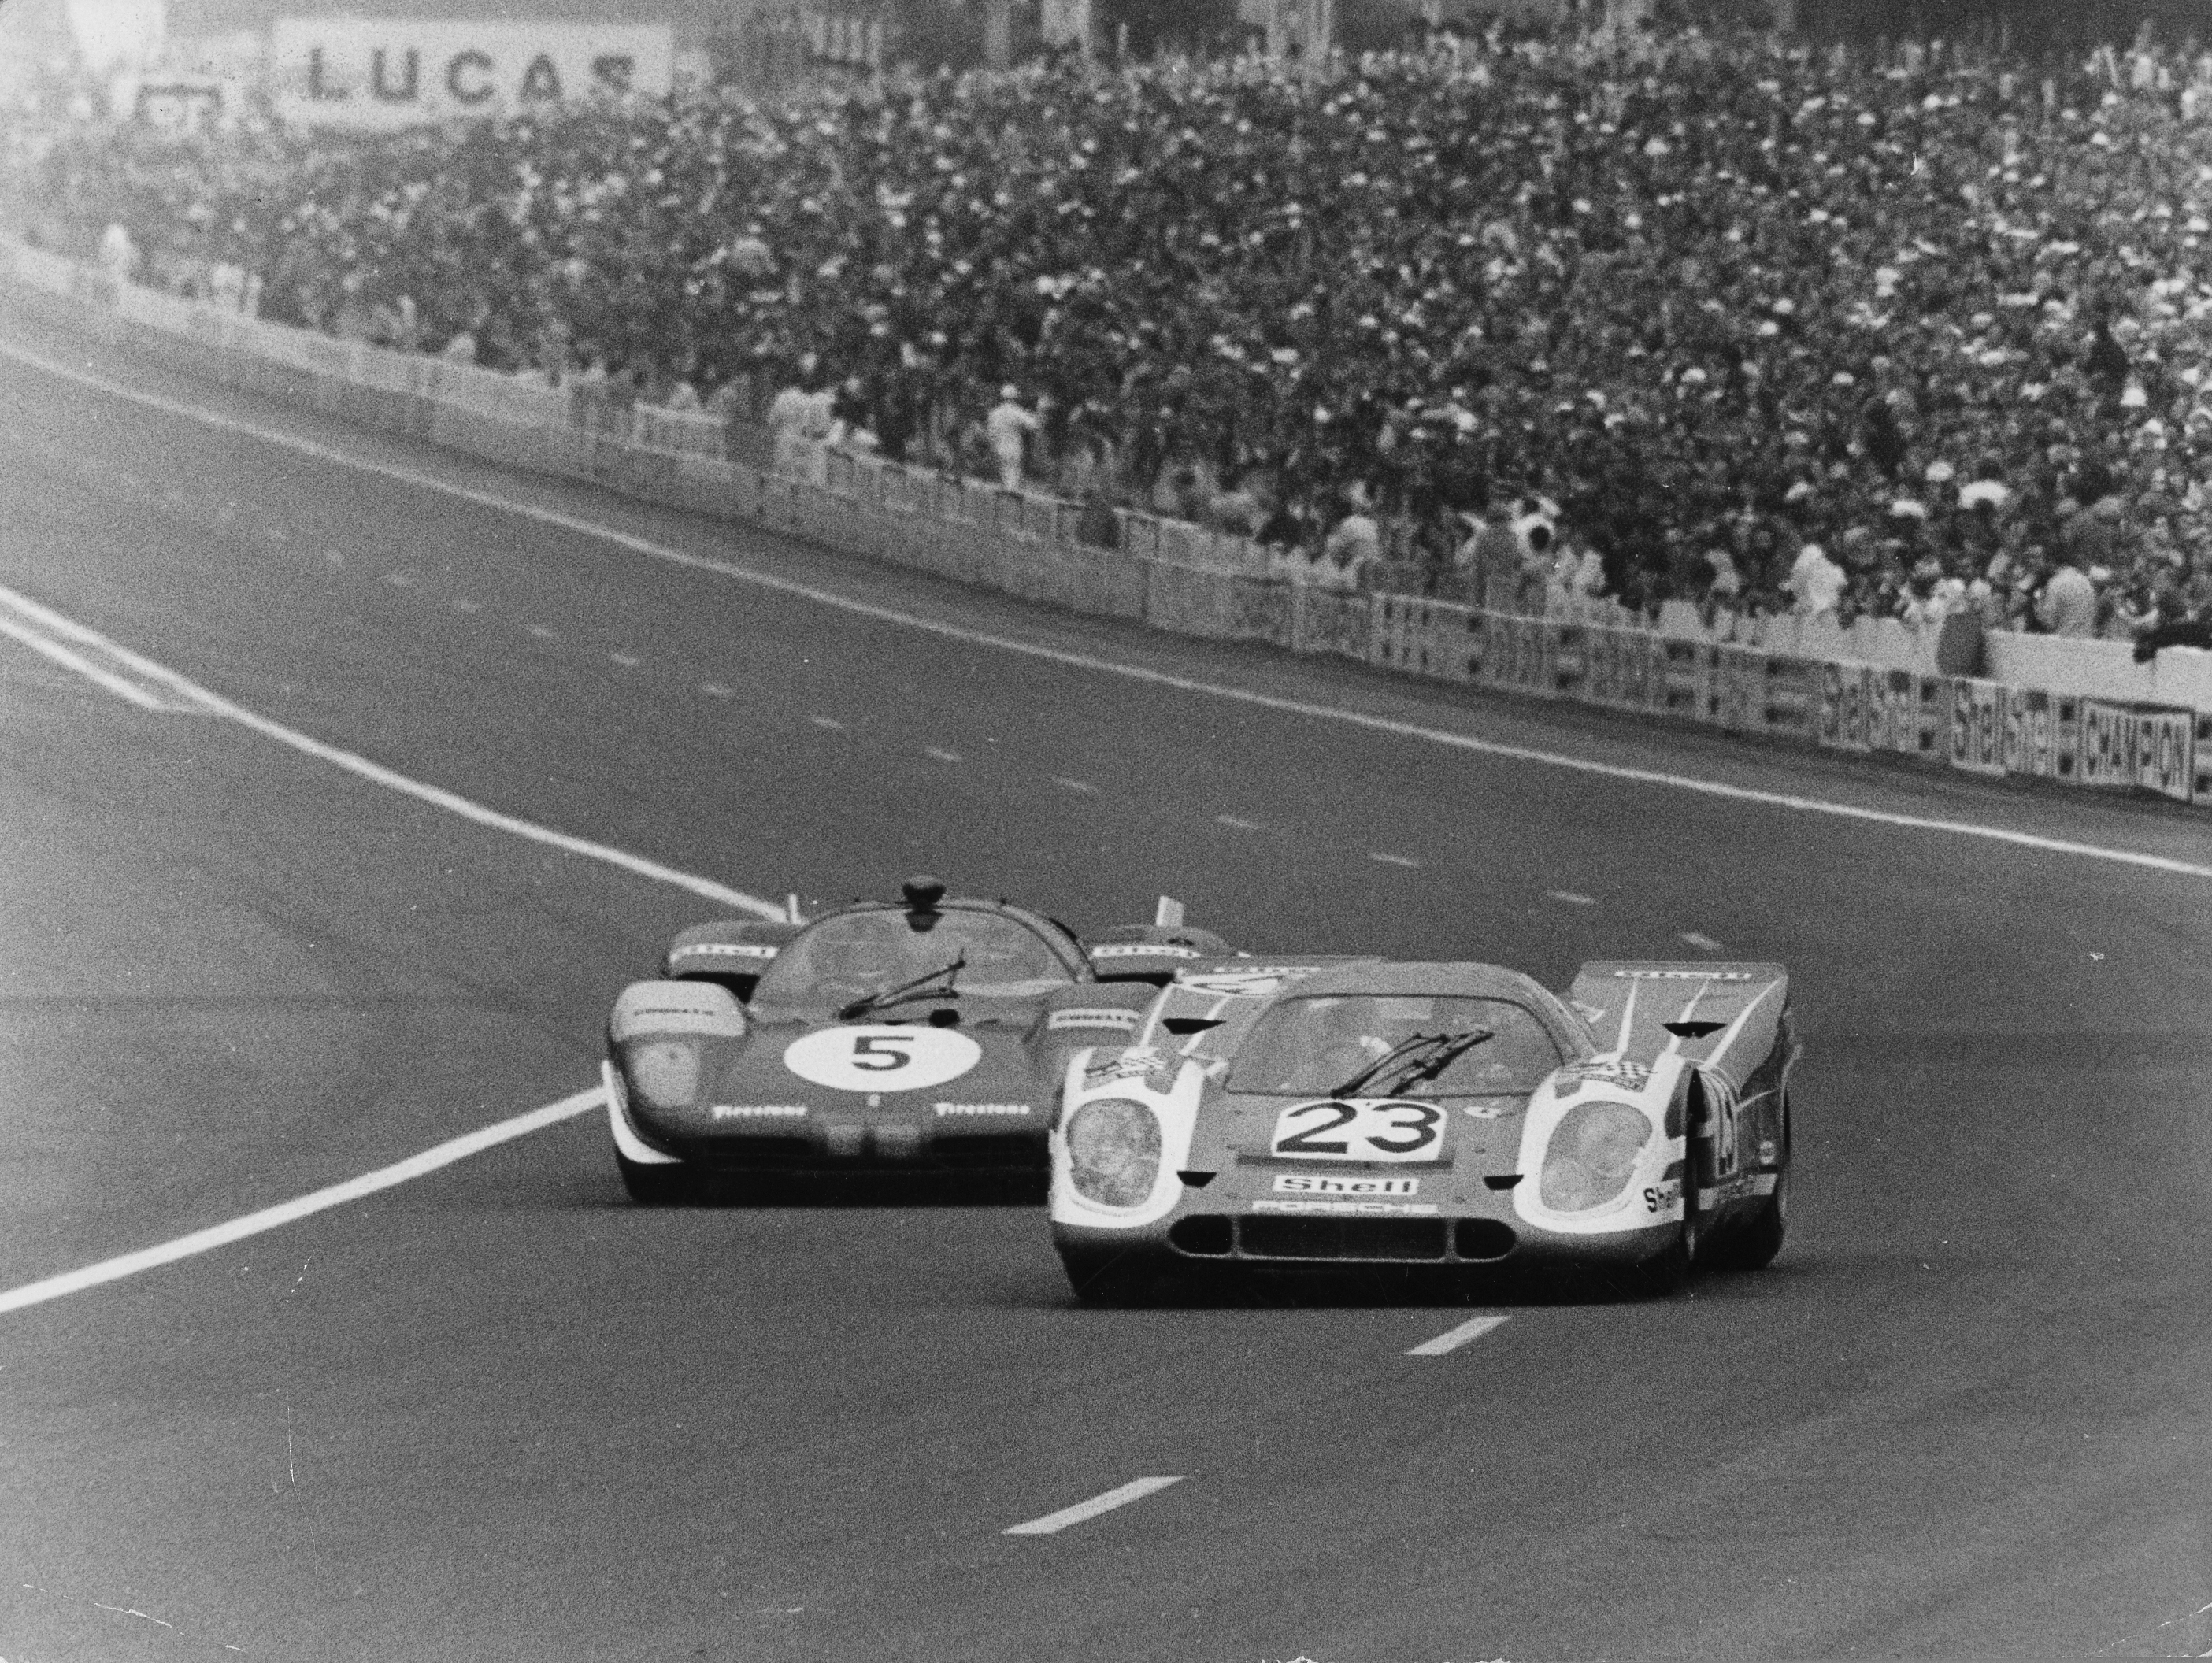 Hans Herrmann and Richard Attwood knew they had the best car. While the other 917s and the Ferrari 512 Ss started full throttle, they took it a little easier.